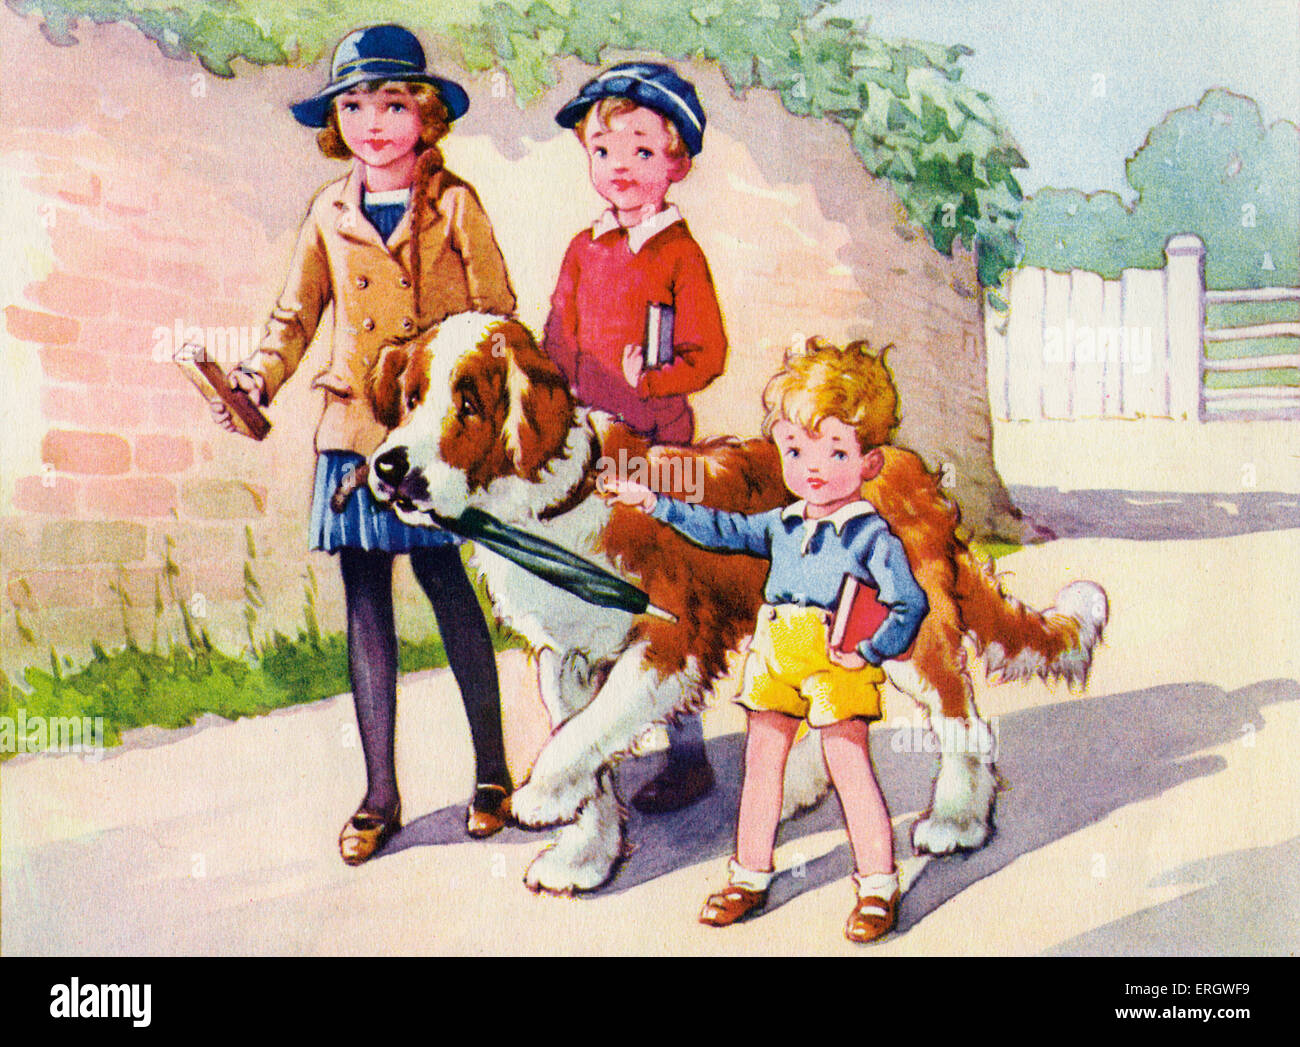 'Peter Pan and Wendy' by James Matthew Barrie. Wendy, John and Michael Darling with Nana the dog. JMB: Scottish novelist and Stock Photo